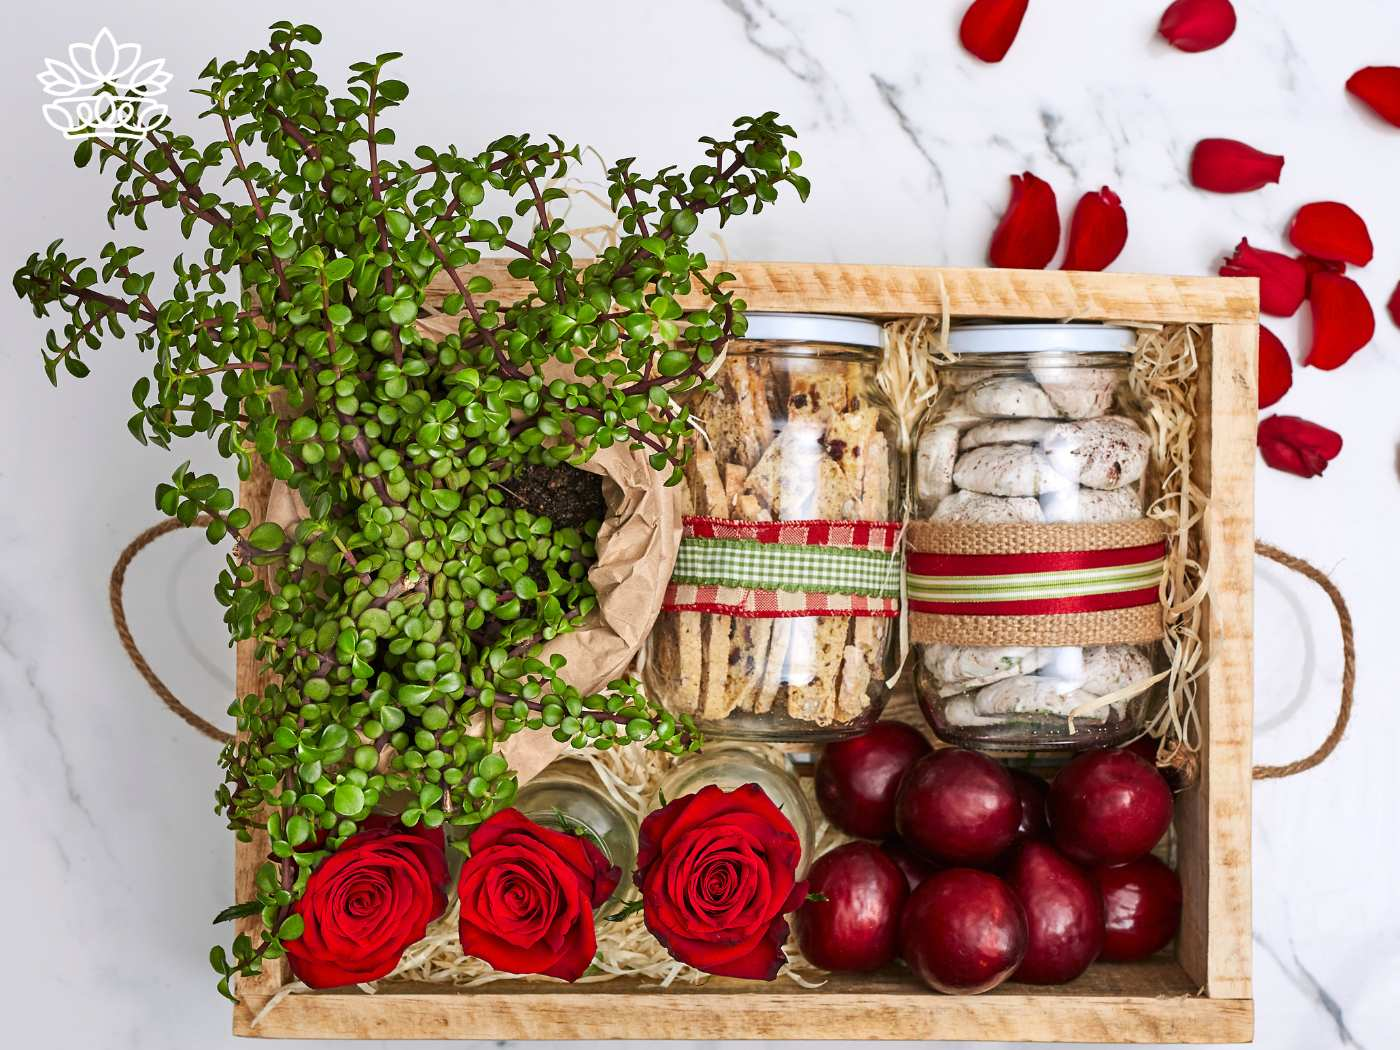 Elegantly arranged gift box containing vibrant red roses, fresh red apples, a lush green potted plant, and jars filled with cookies and meringues, all set against a marble background with scattered rose petals. Ideal for a thoughtful surprise from Fabulous Flowers and Gifts. Gift Boxes for wife. Delivered with Heart.